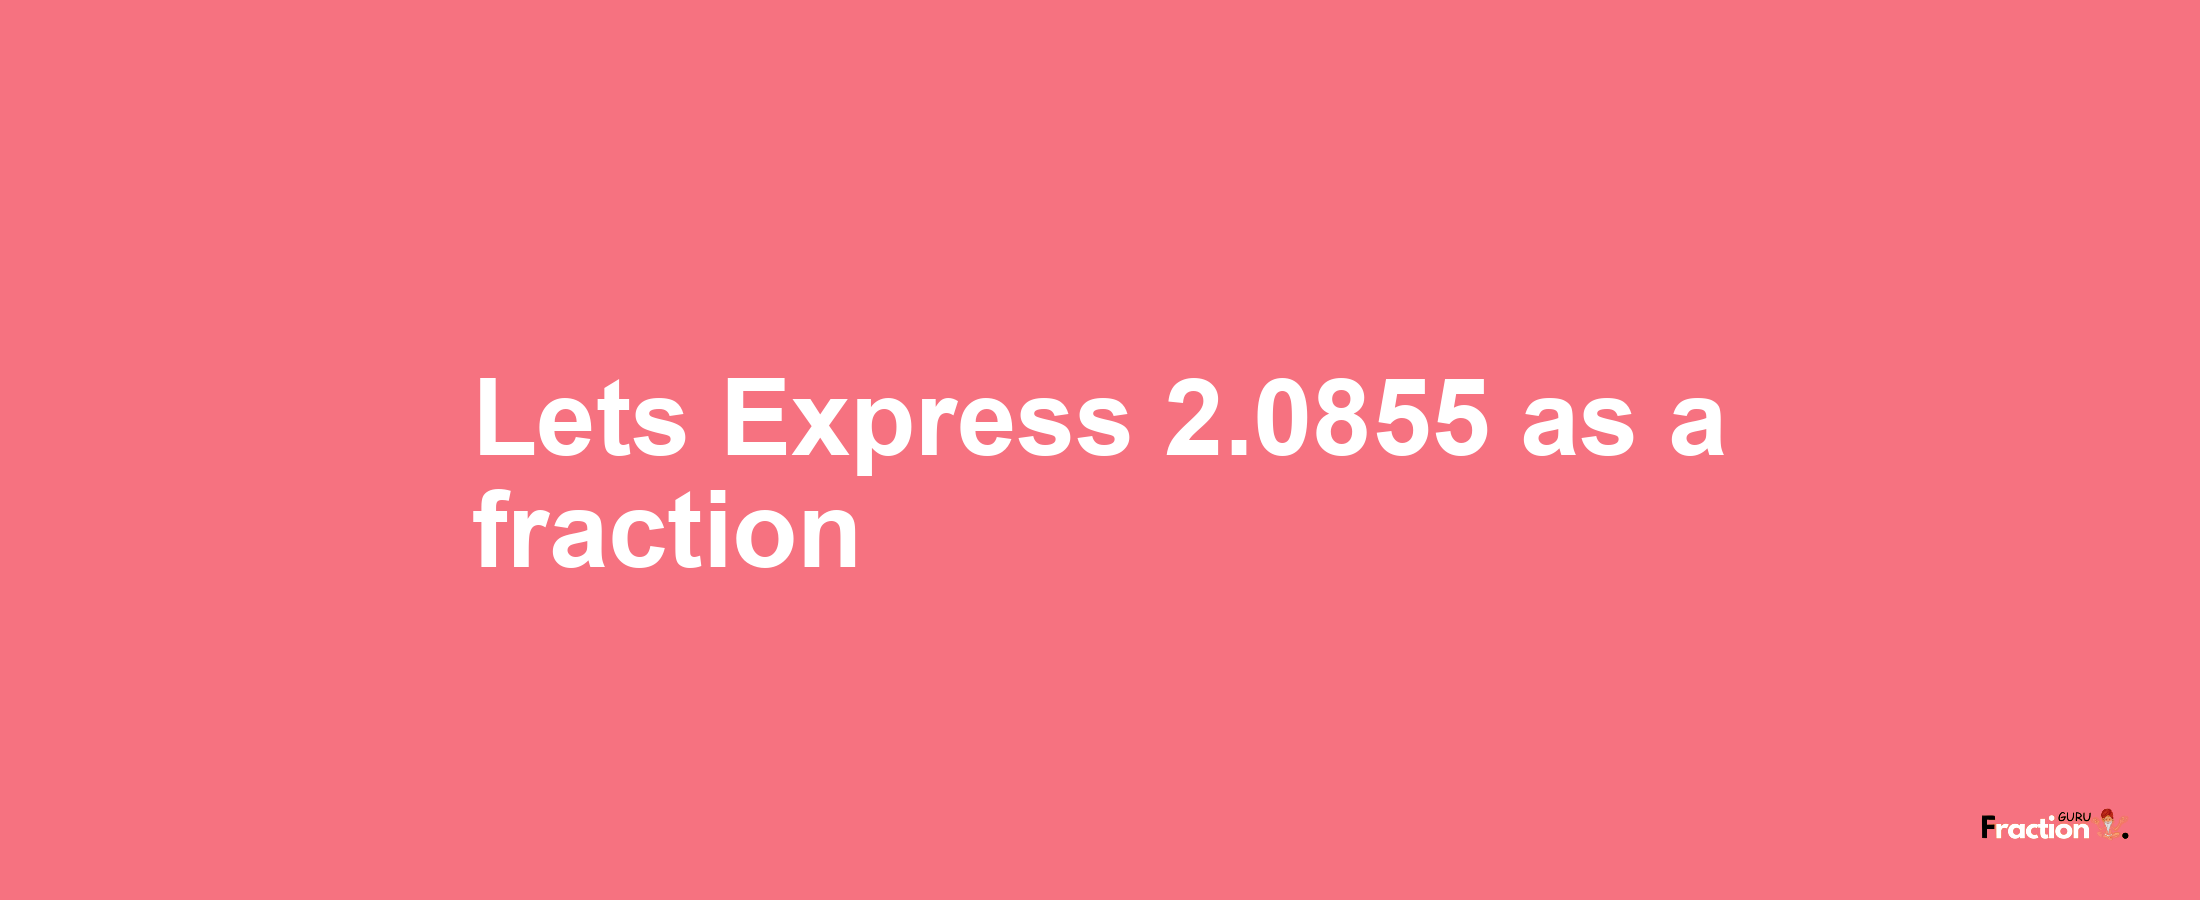 Lets Express 2.0855 as afraction